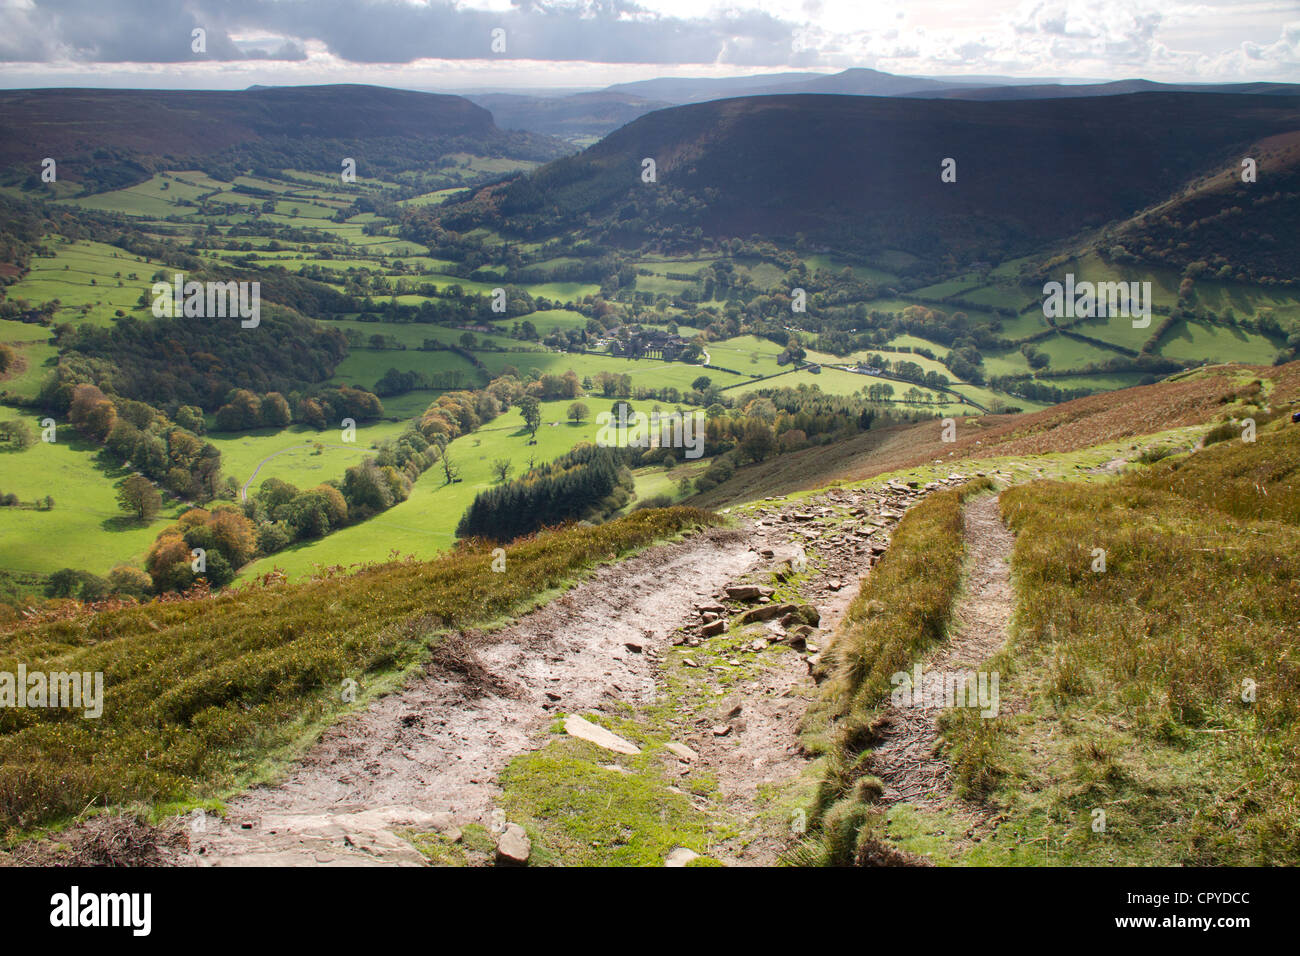 Llanthony in the Black mountains of Wales Stock Photo